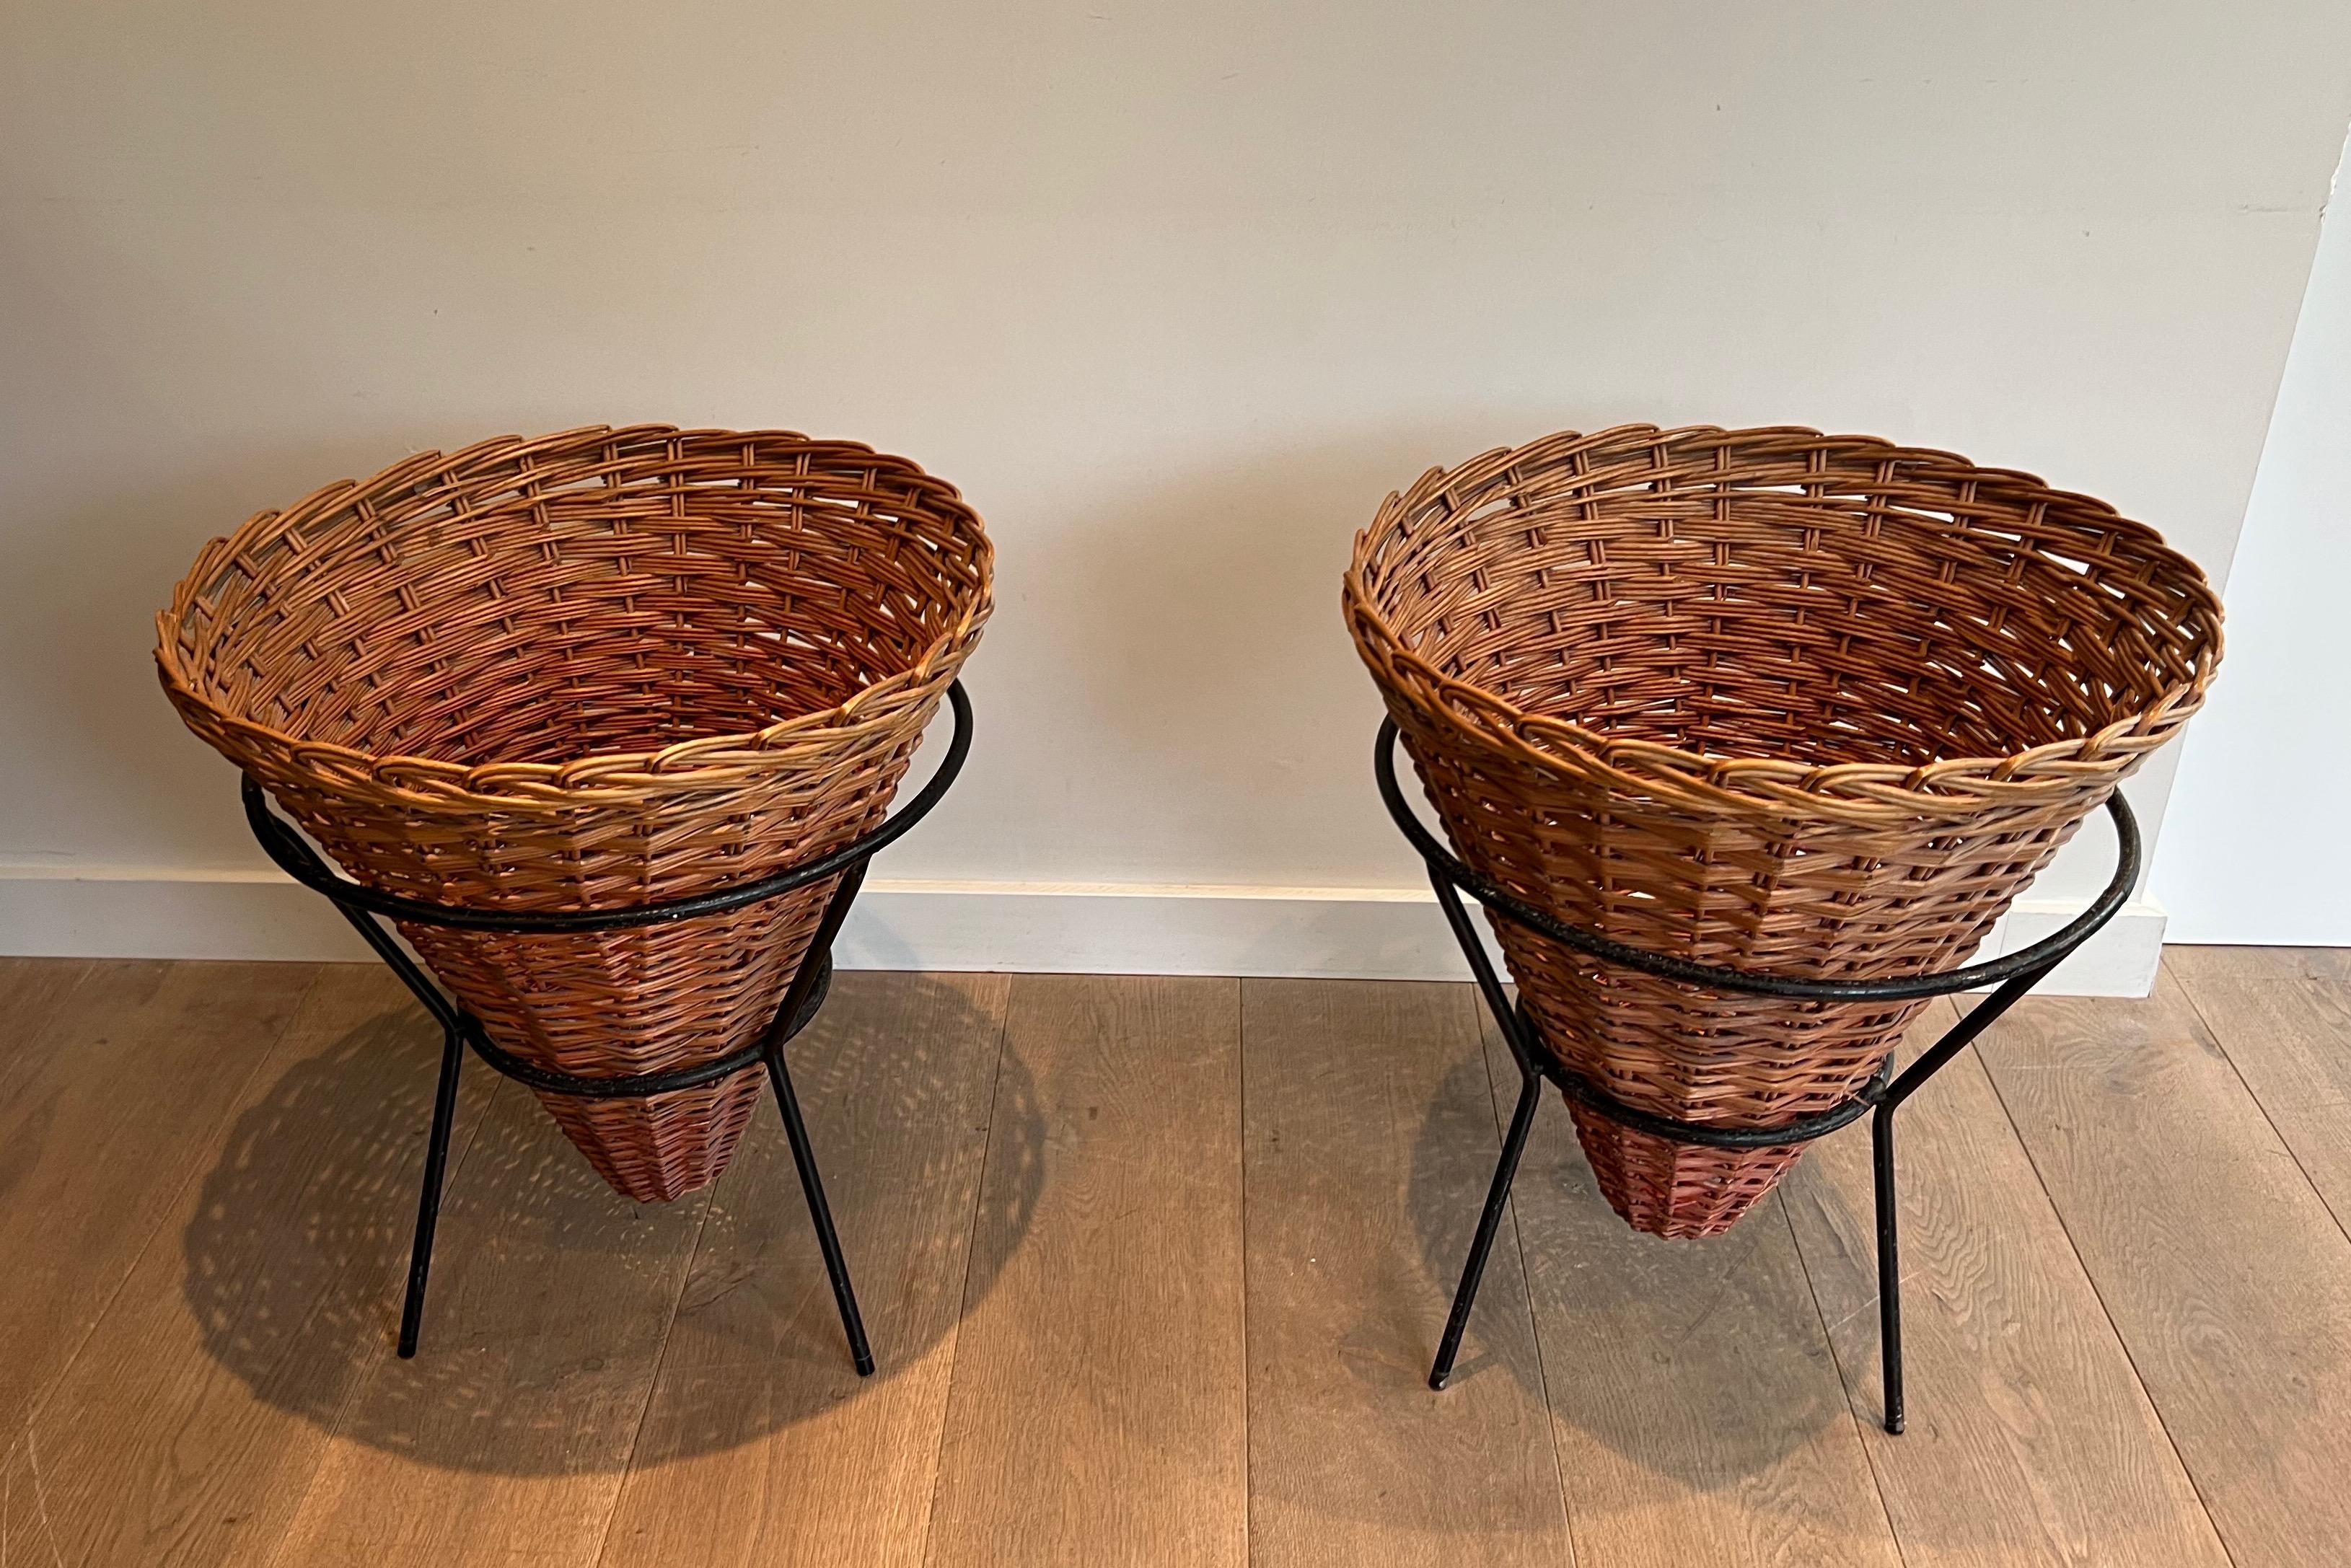 Set of Three Black Lacquered Metal and Rattan Planters, French Work, circa 1950 In Good Condition For Sale In Marcq-en-Barœul, Hauts-de-France